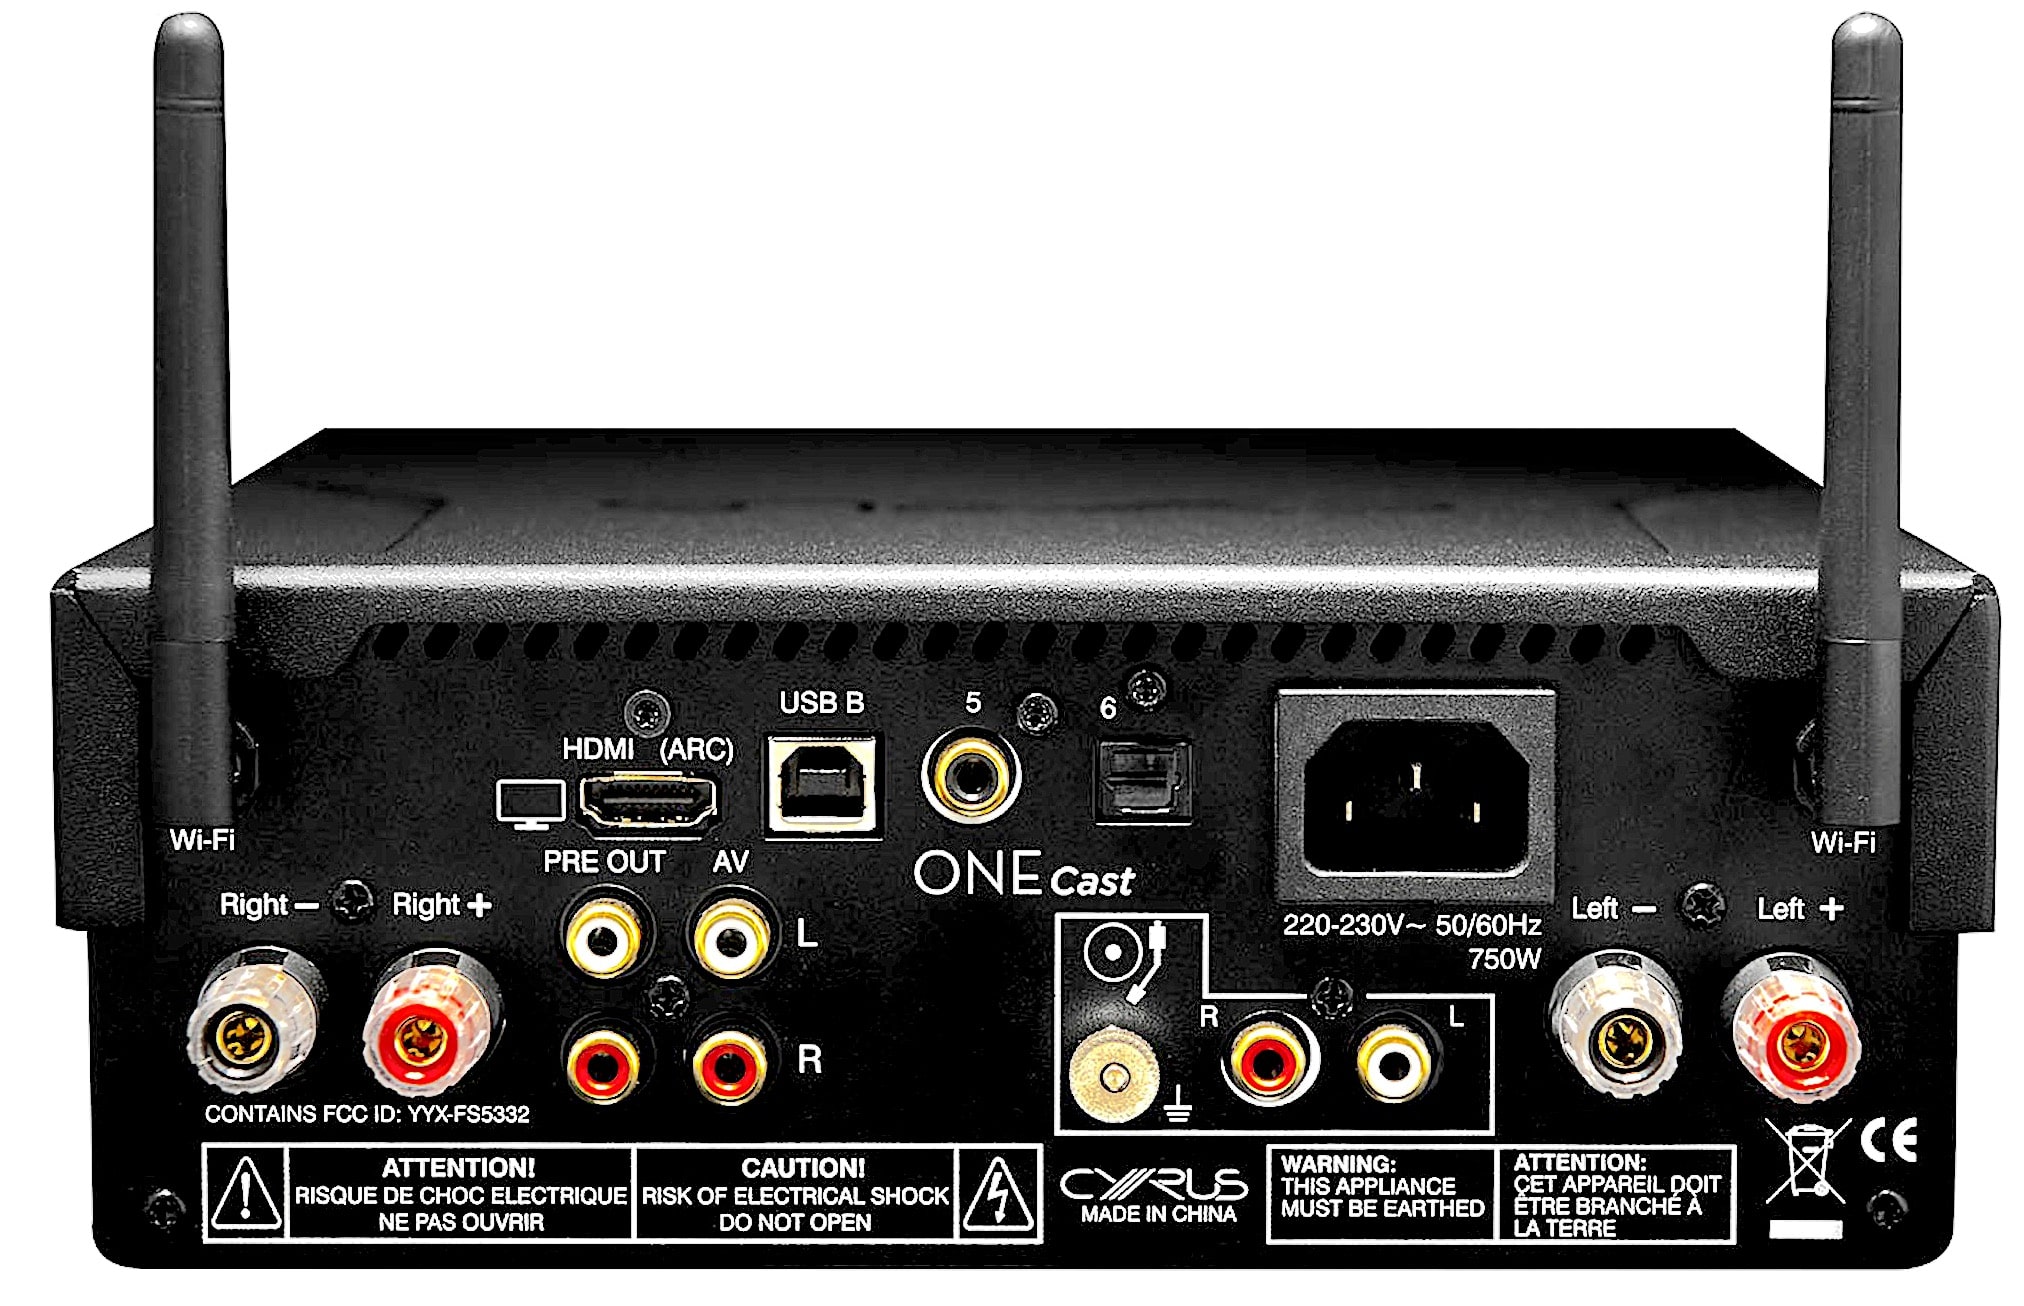 ONE Cast Streaming Amplifier from Cyrus